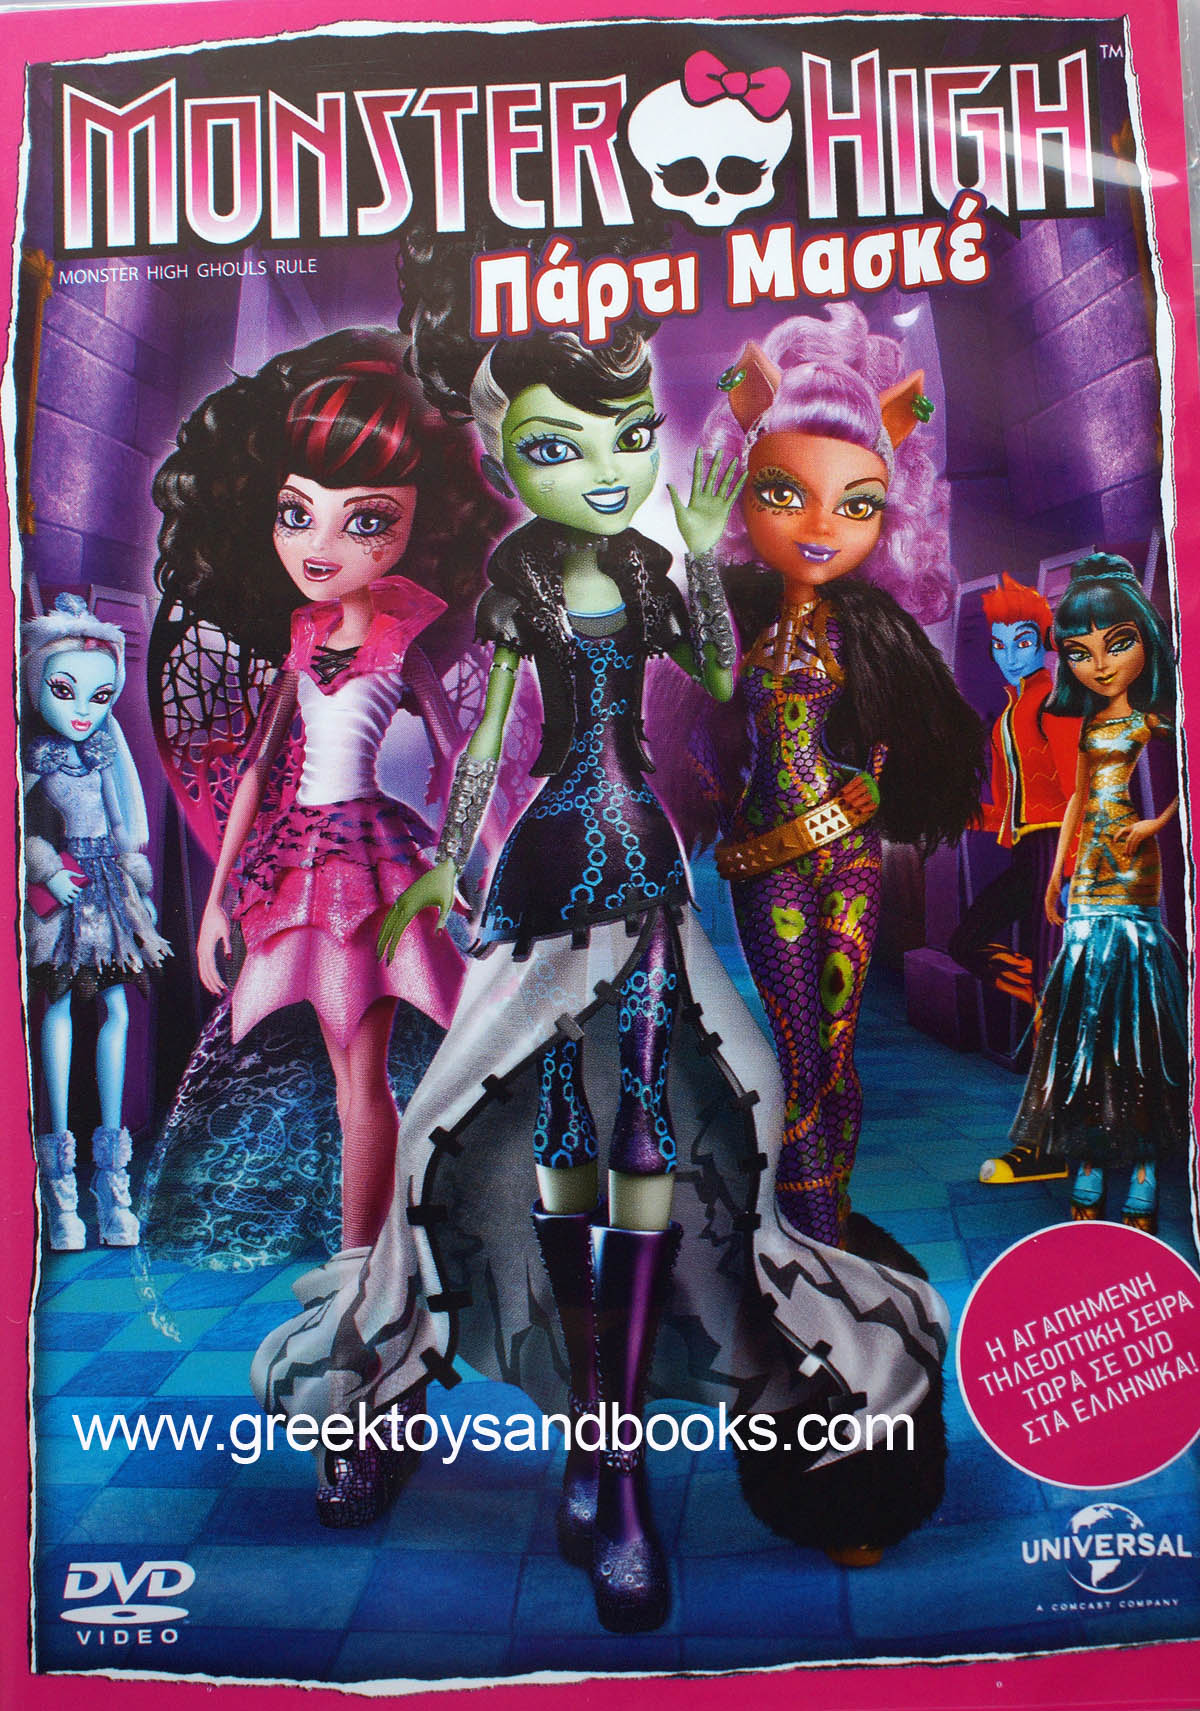 Monster High Ghouls Rule DVD with Greek Audio